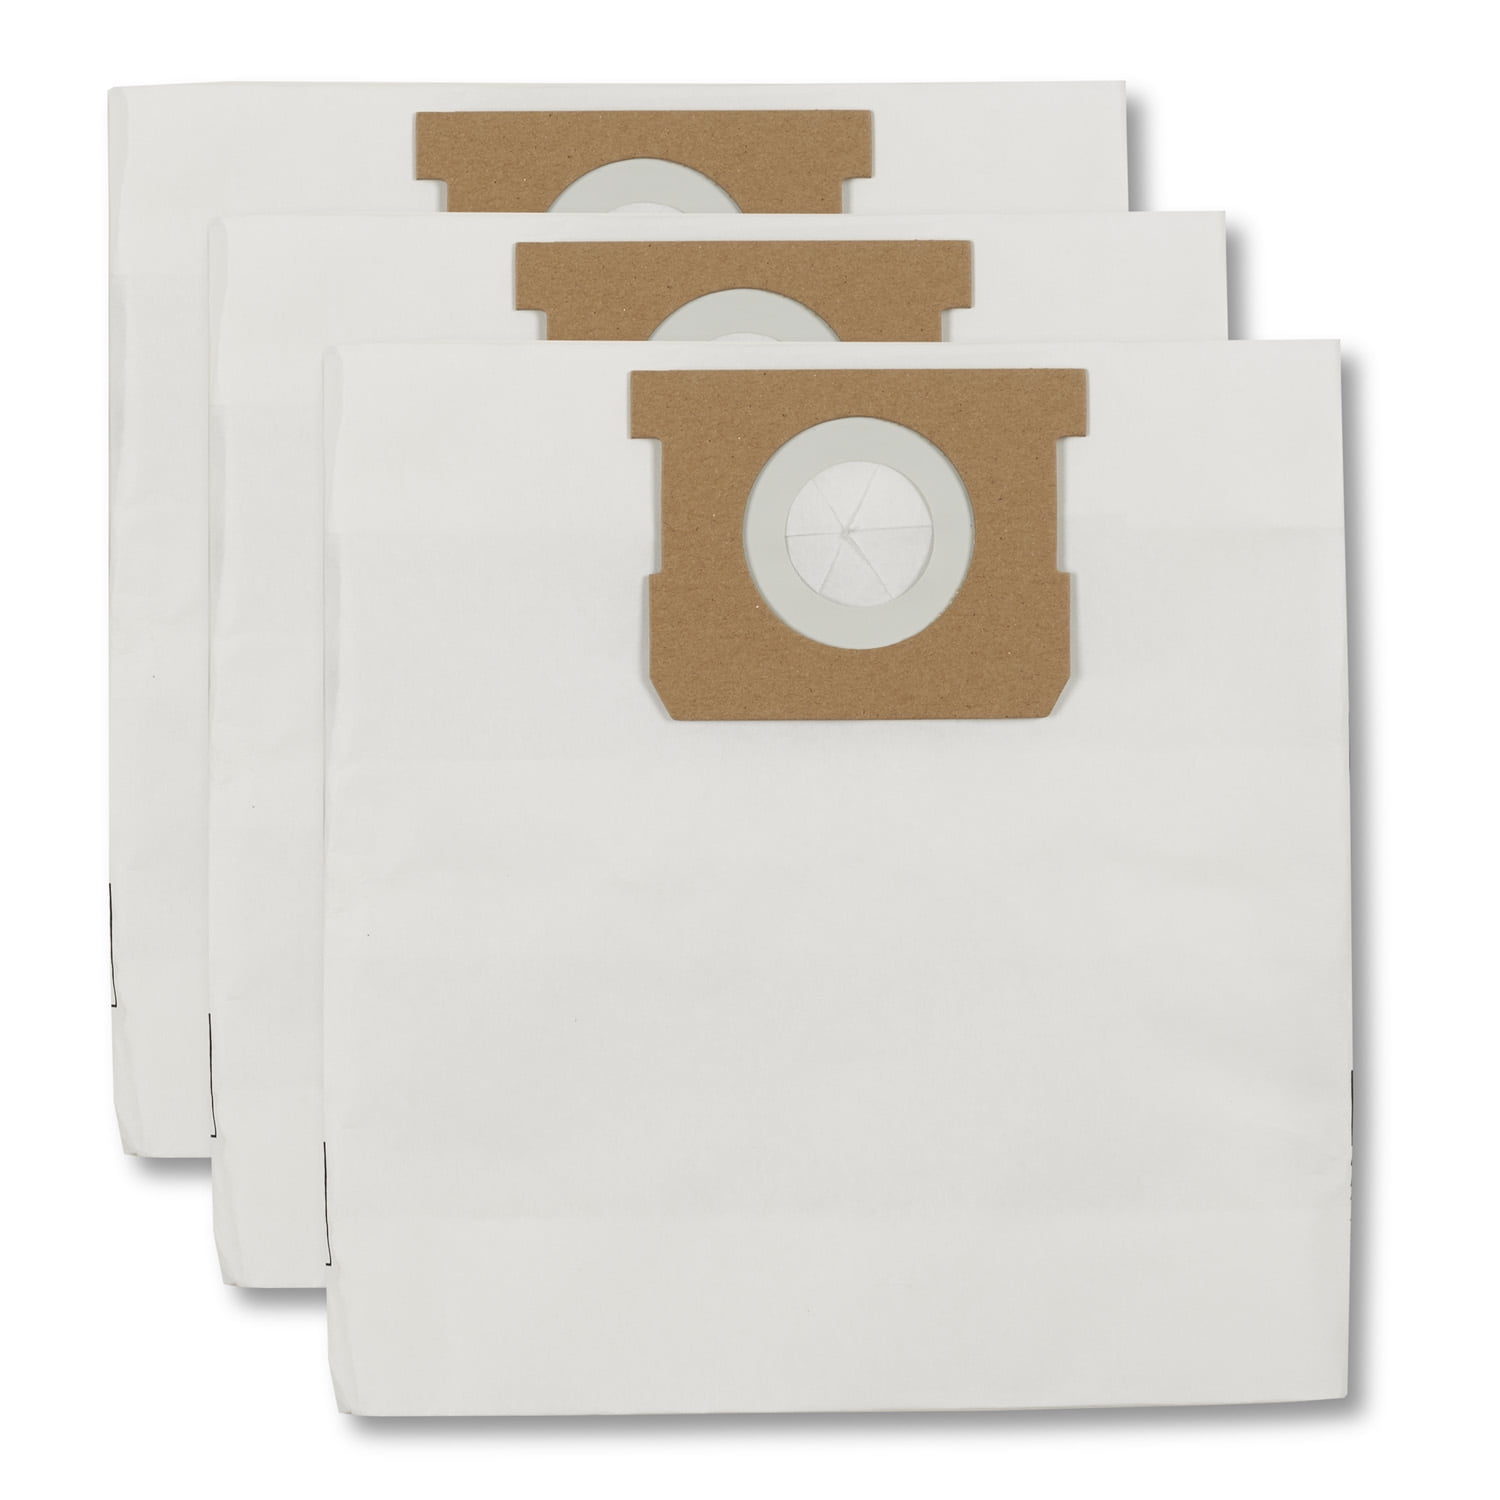 E72B Janitor Z 716, 720, 1516 Vacuum Cleaner Bags - 9001954552 | Electrolux